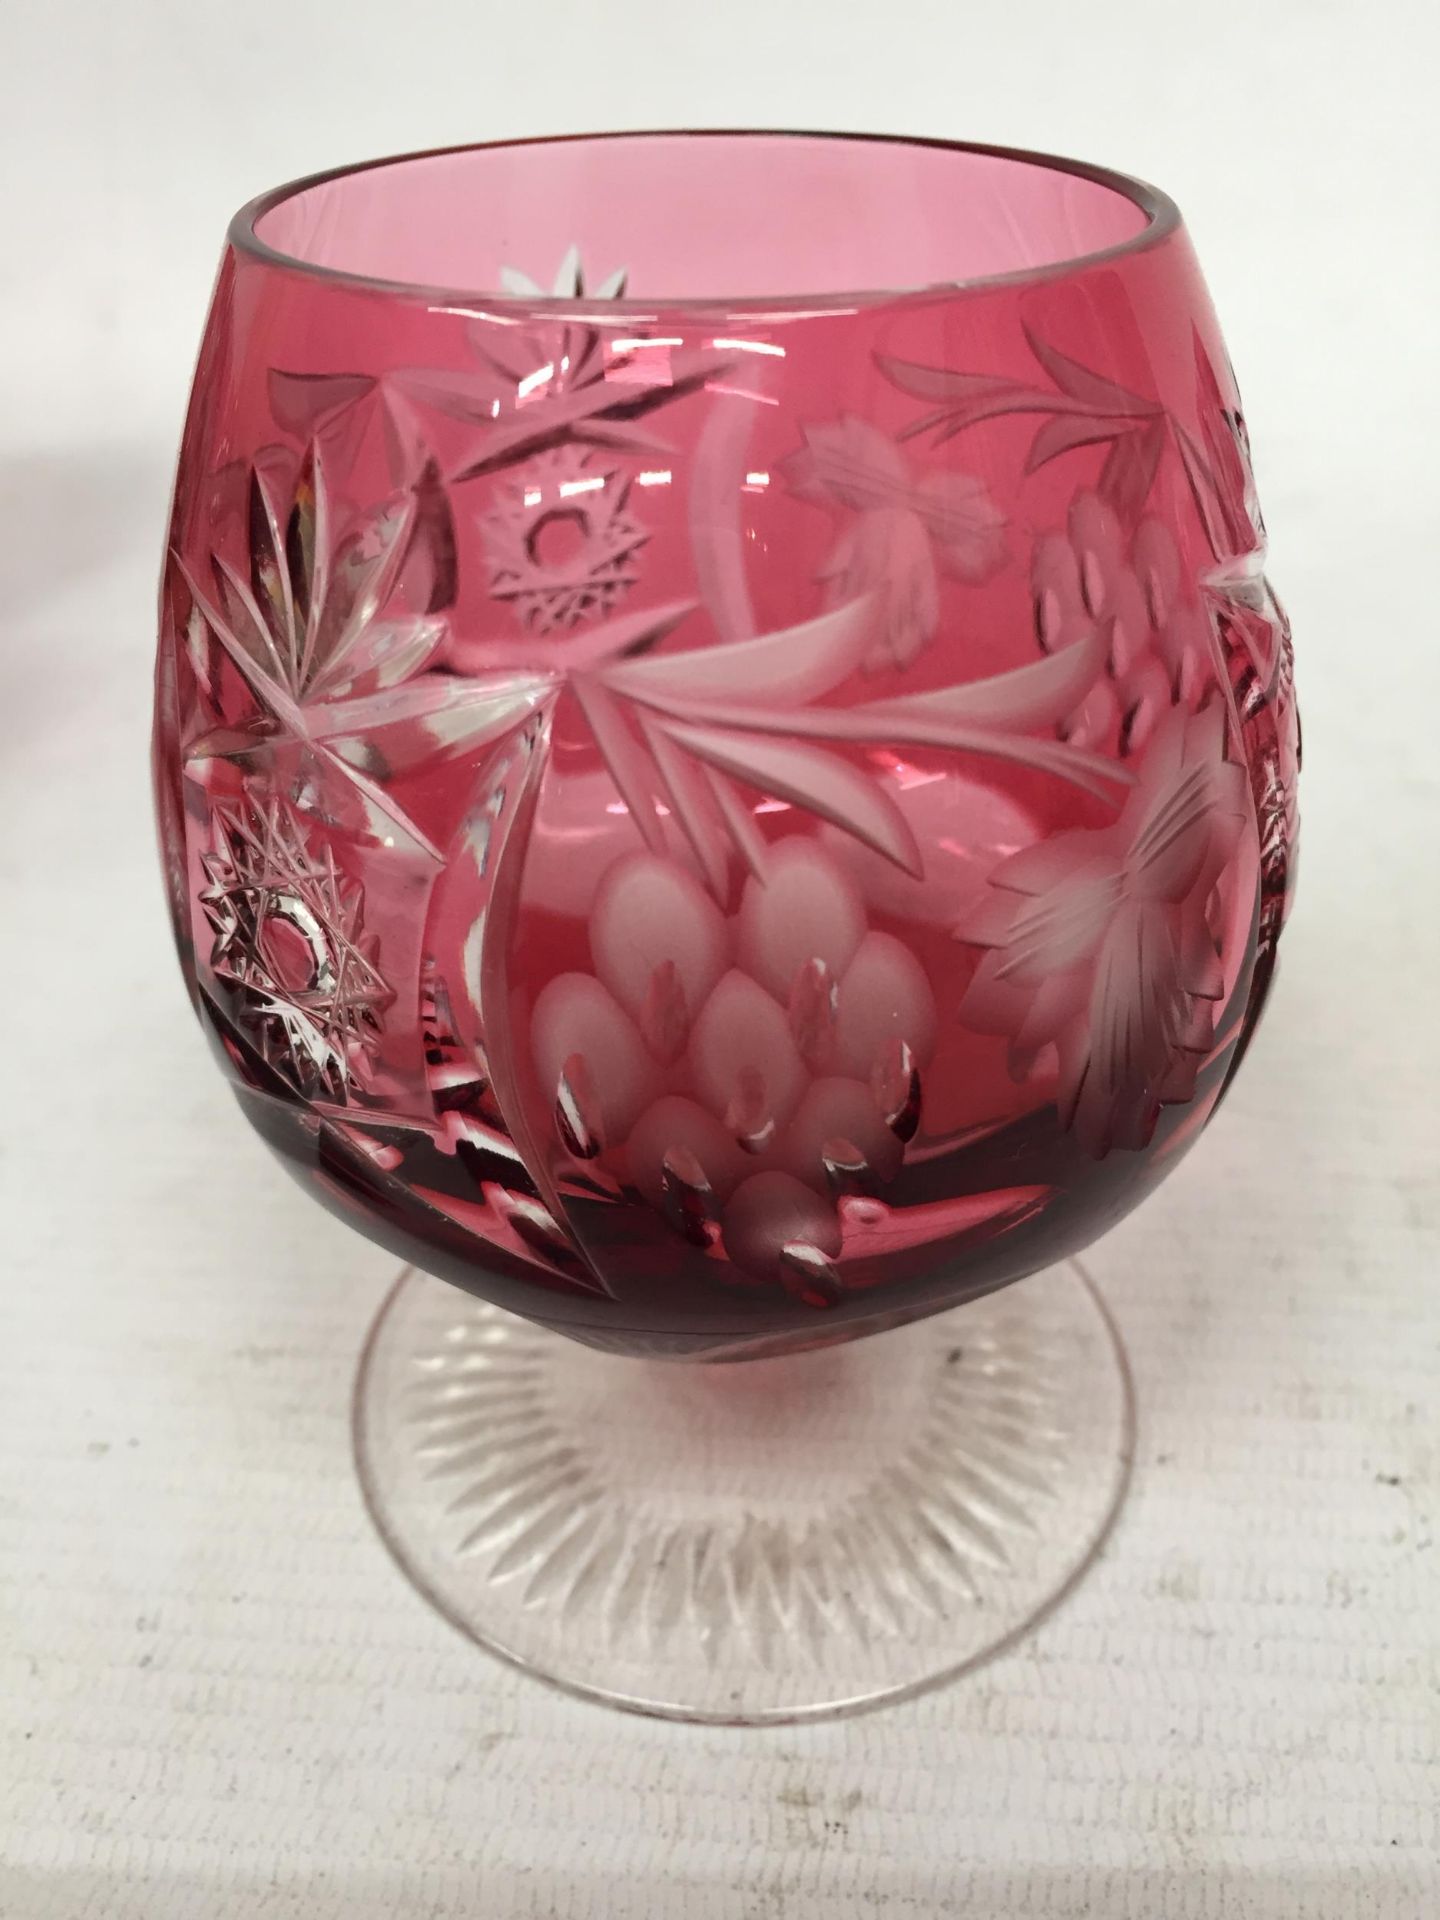 A SET OF VINTAGE NACHTMANN CUT GLASS CRYSTAL CRANBERRY BRANDY / COGNAC GLASSES WITH ETCHED DESIGN - Image 2 of 4